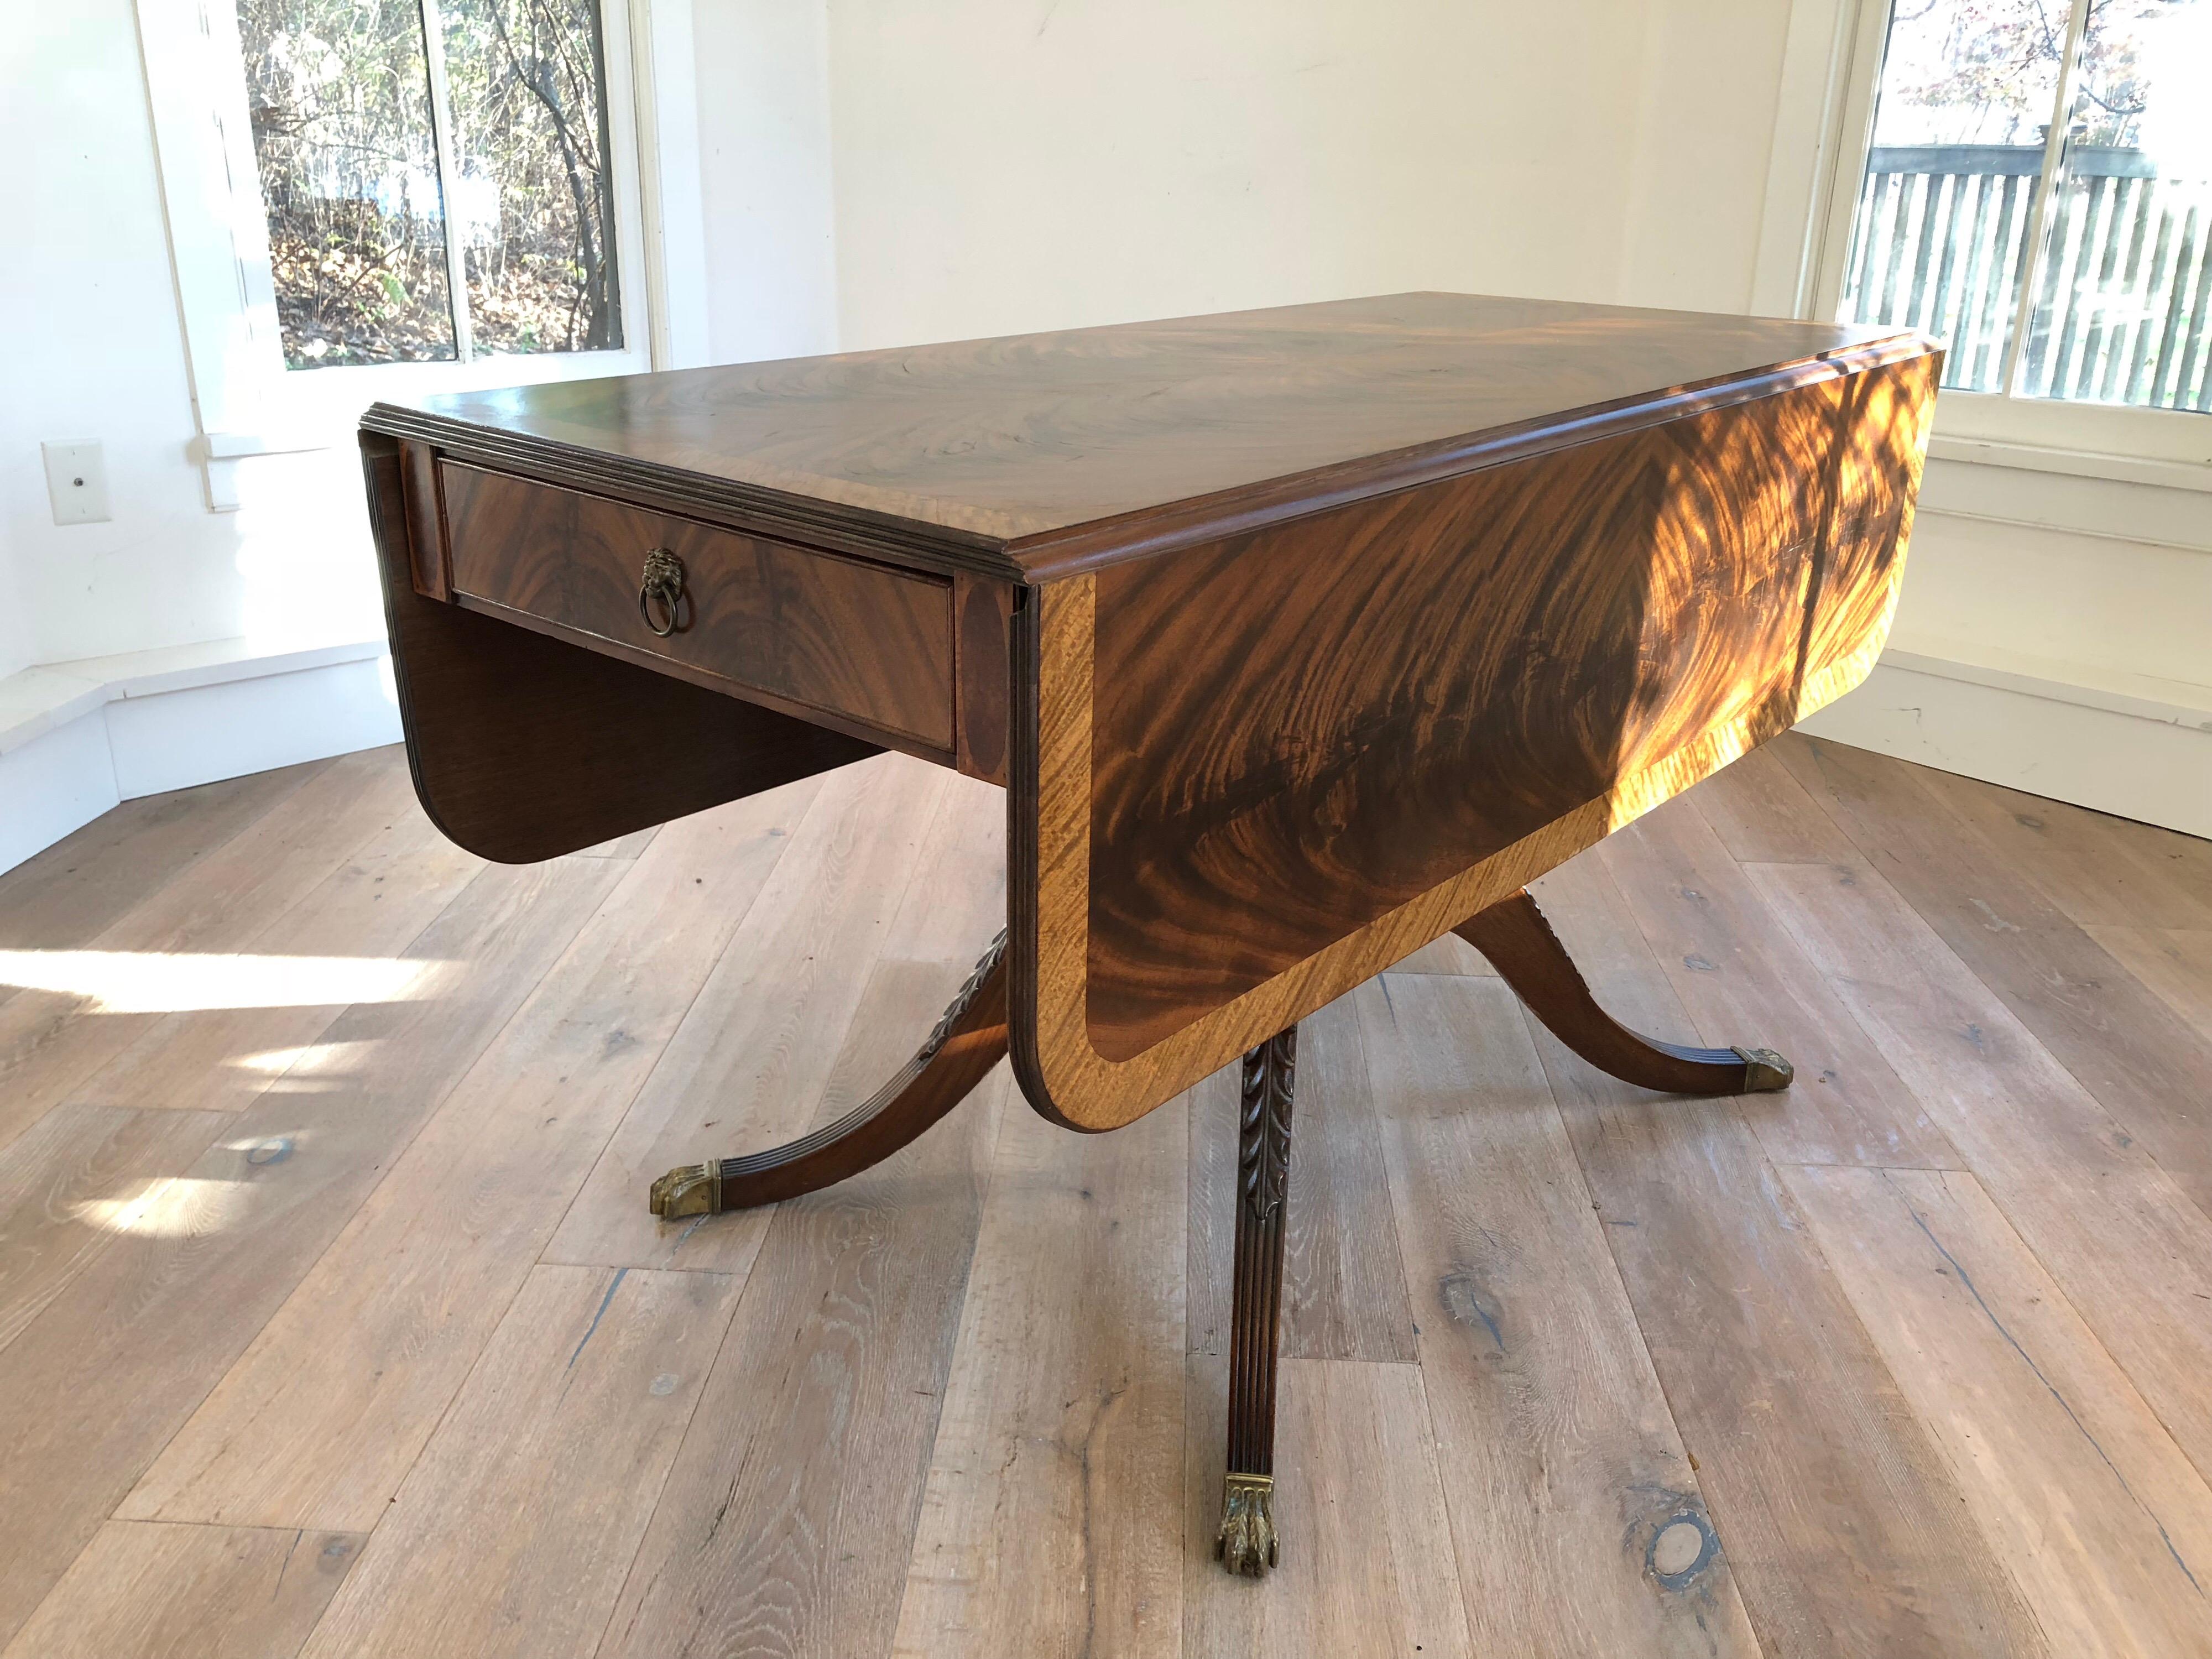 A Classical style drop-leaf library table. Beautiful flame stitch mahogany top and two drawers on either end. Brass pull hardware and feet caps. 
Top measures 54